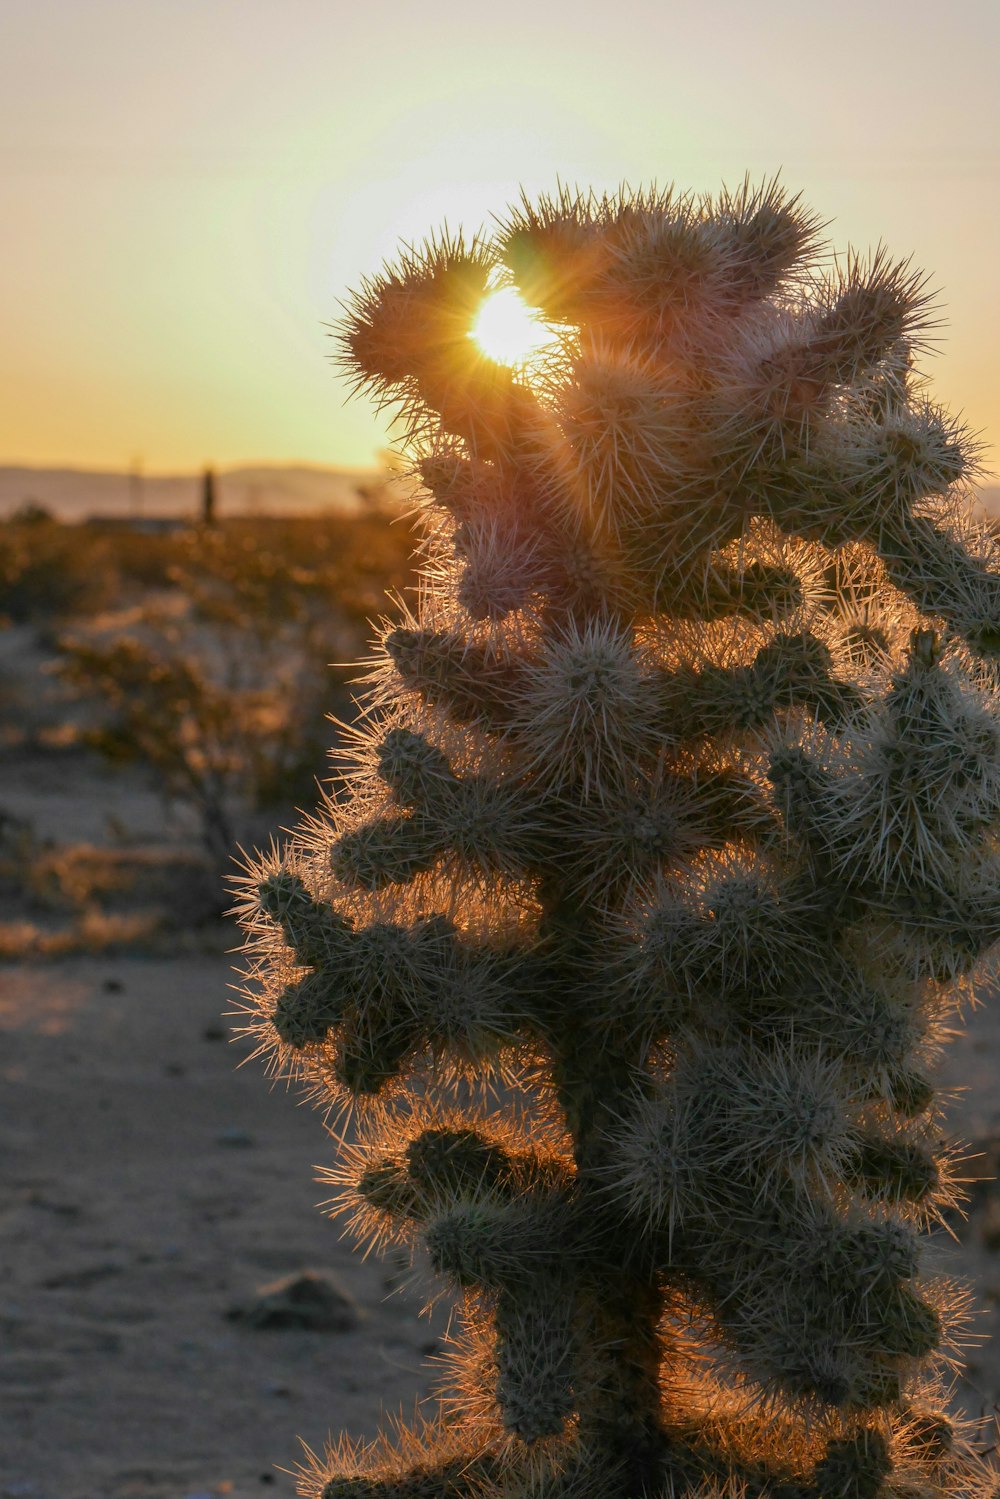 a cactus plant with the sun setting in the background